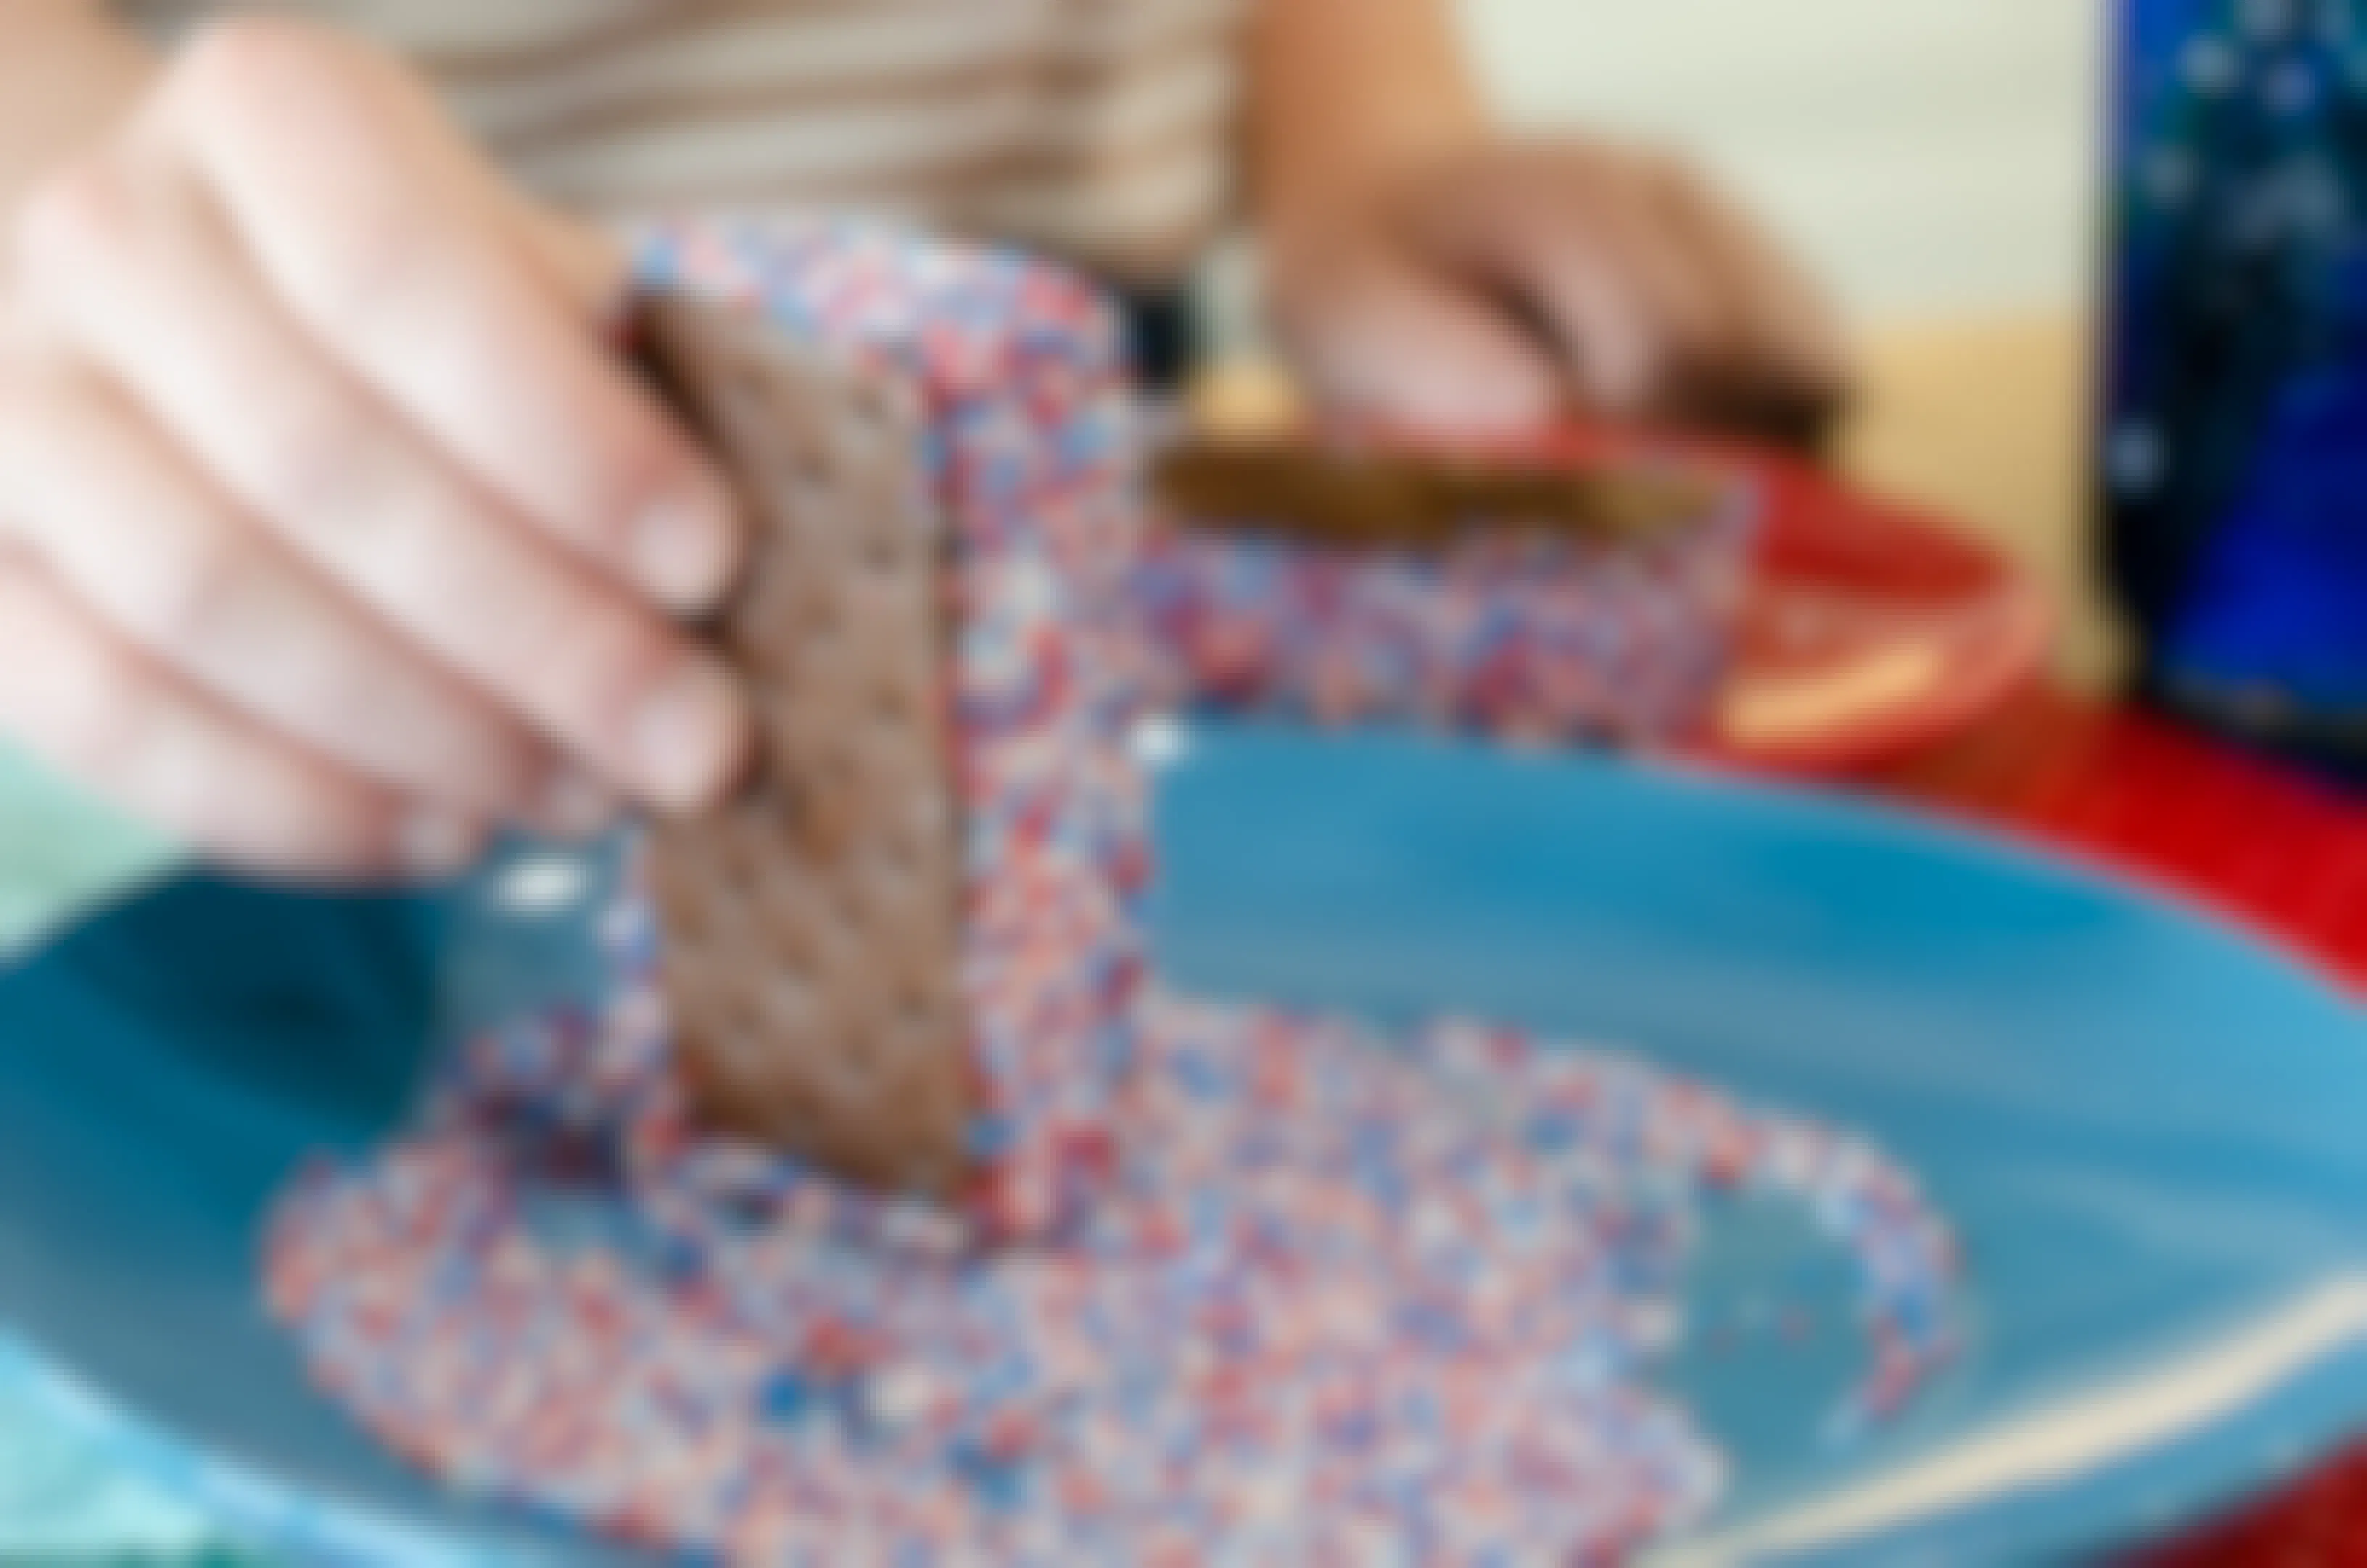 A person dipping an ice cream sandwich in red, white, and blue sprinkles.